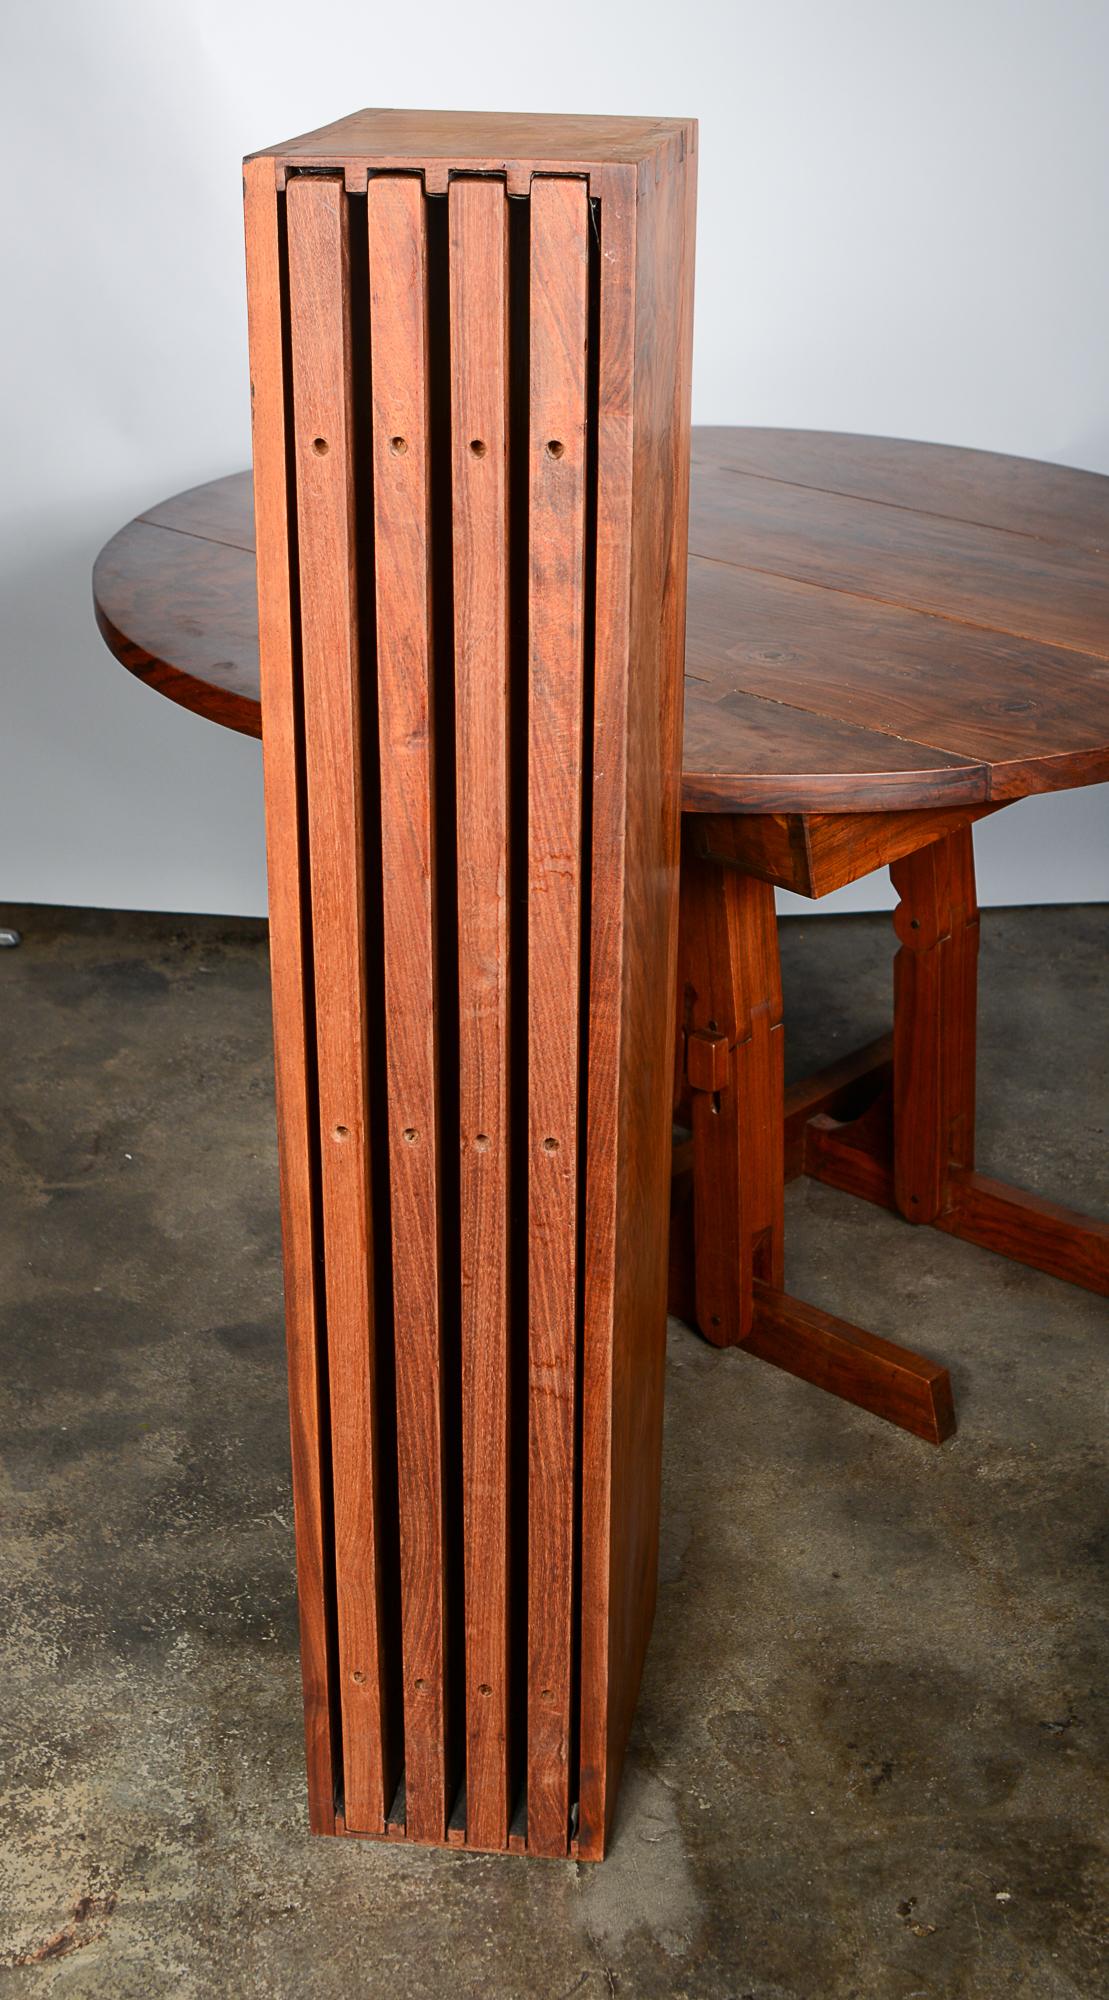 Walnut Dining Table with Four Leaves by Designer and Craftsman Morris Sheppard In Good Condition For Sale In San Mateo, CA